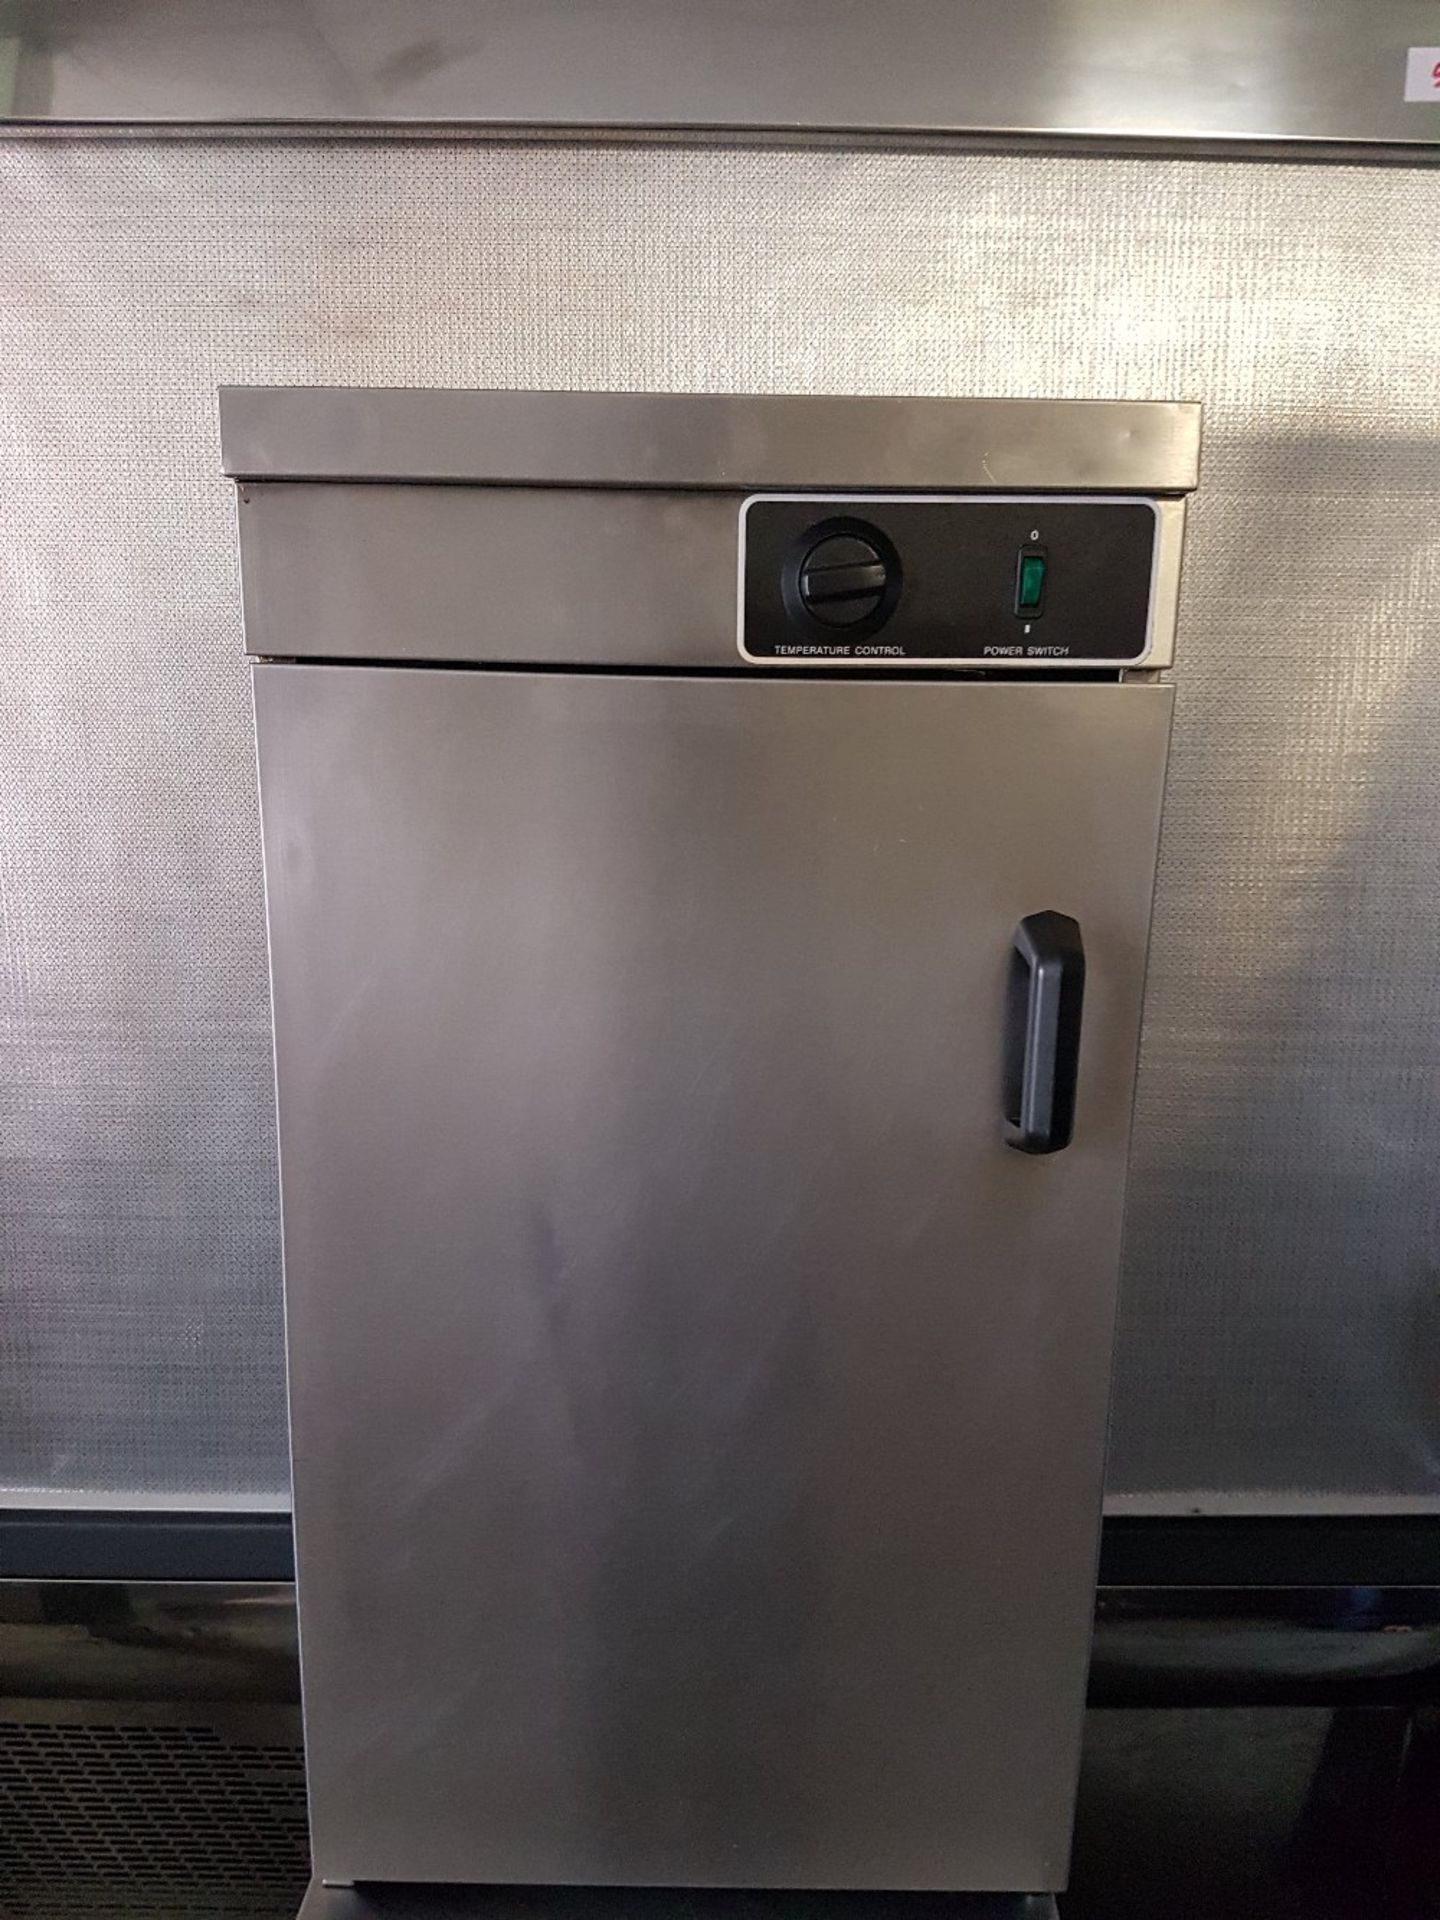 Stainless Steel Single Door Hot Cupboard -W450mmxH850mmxD450mm – Clean – Good Working Order   One